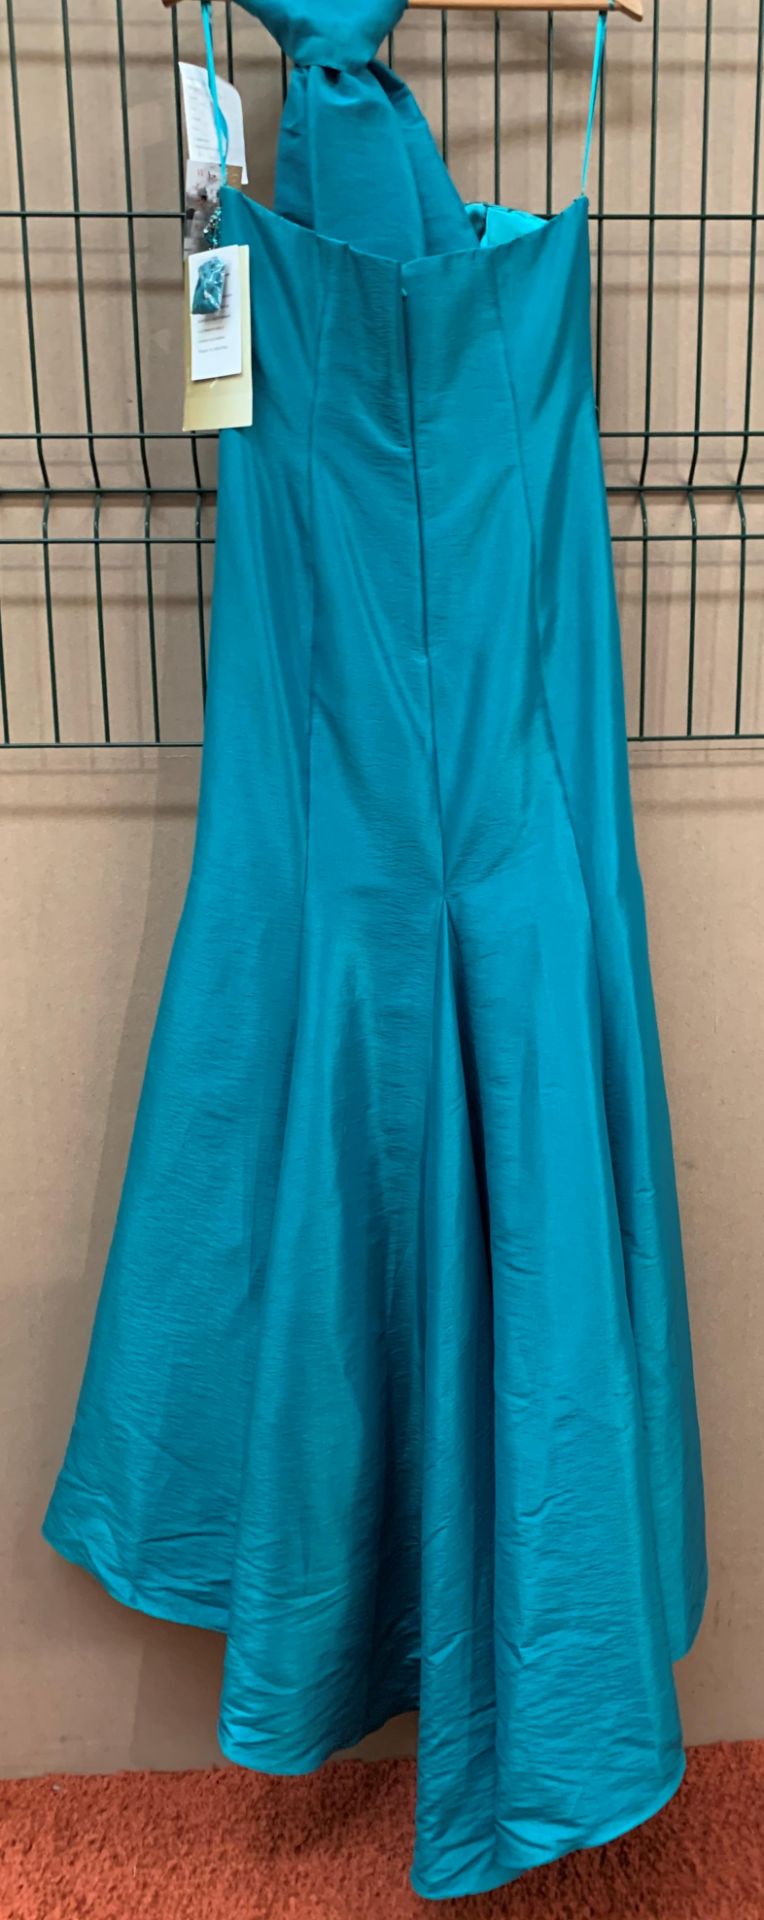 A bridesmaid/prom dress and stole by Man - Image 2 of 2